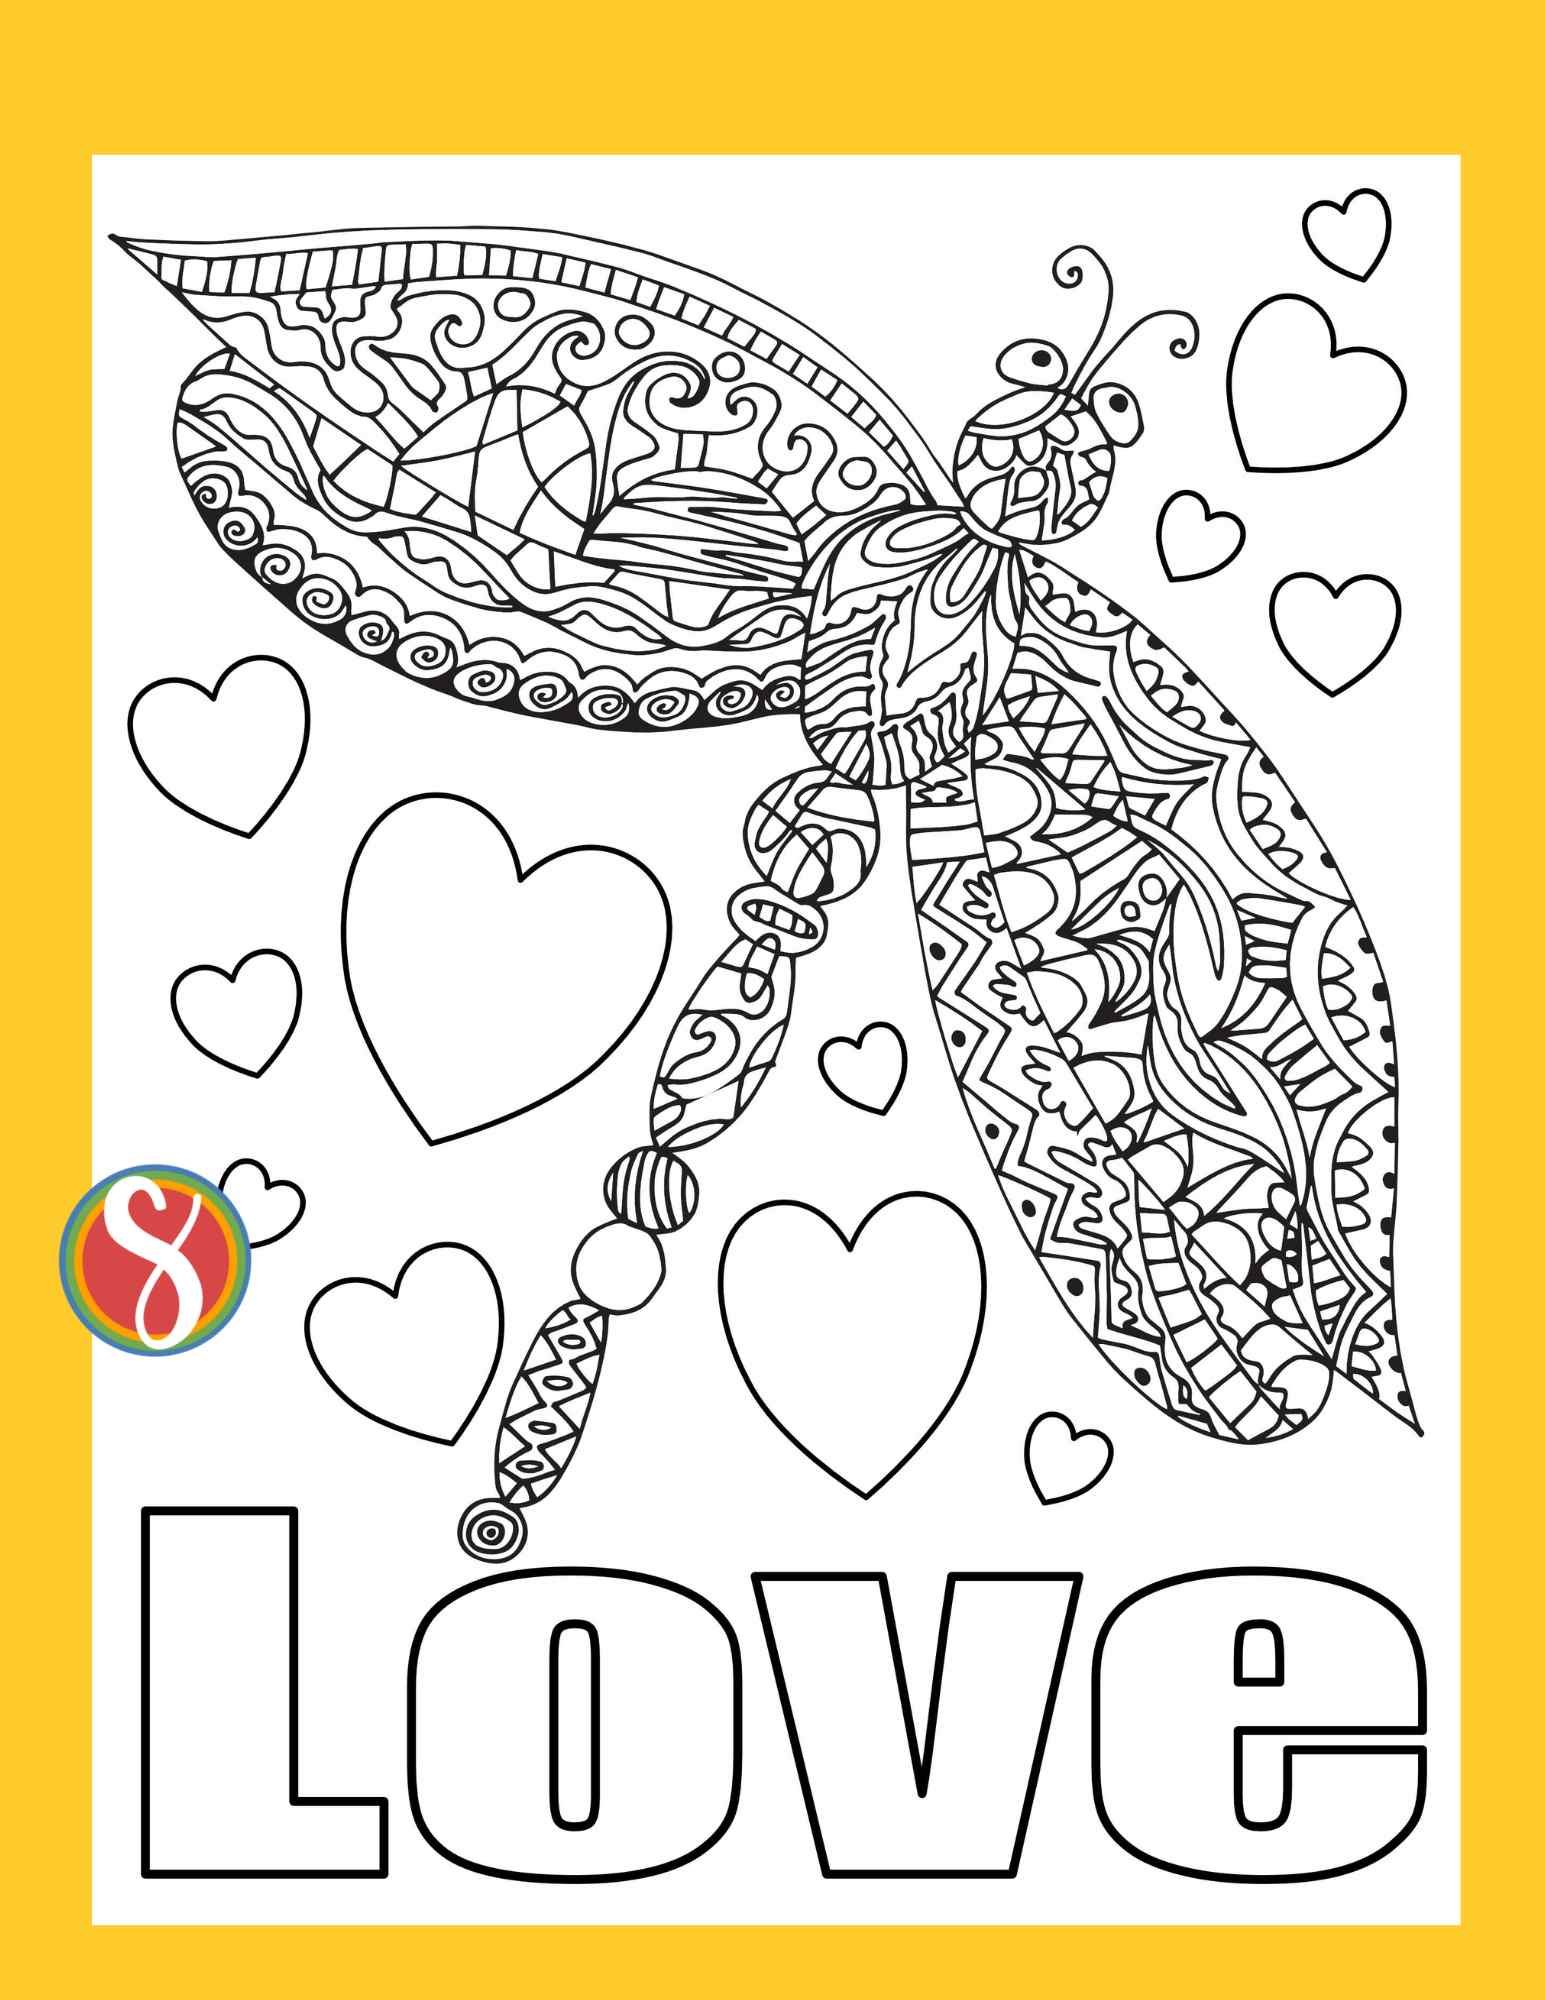 adult dragonfly coloring page dragonfly outline with lots of little doodles inside